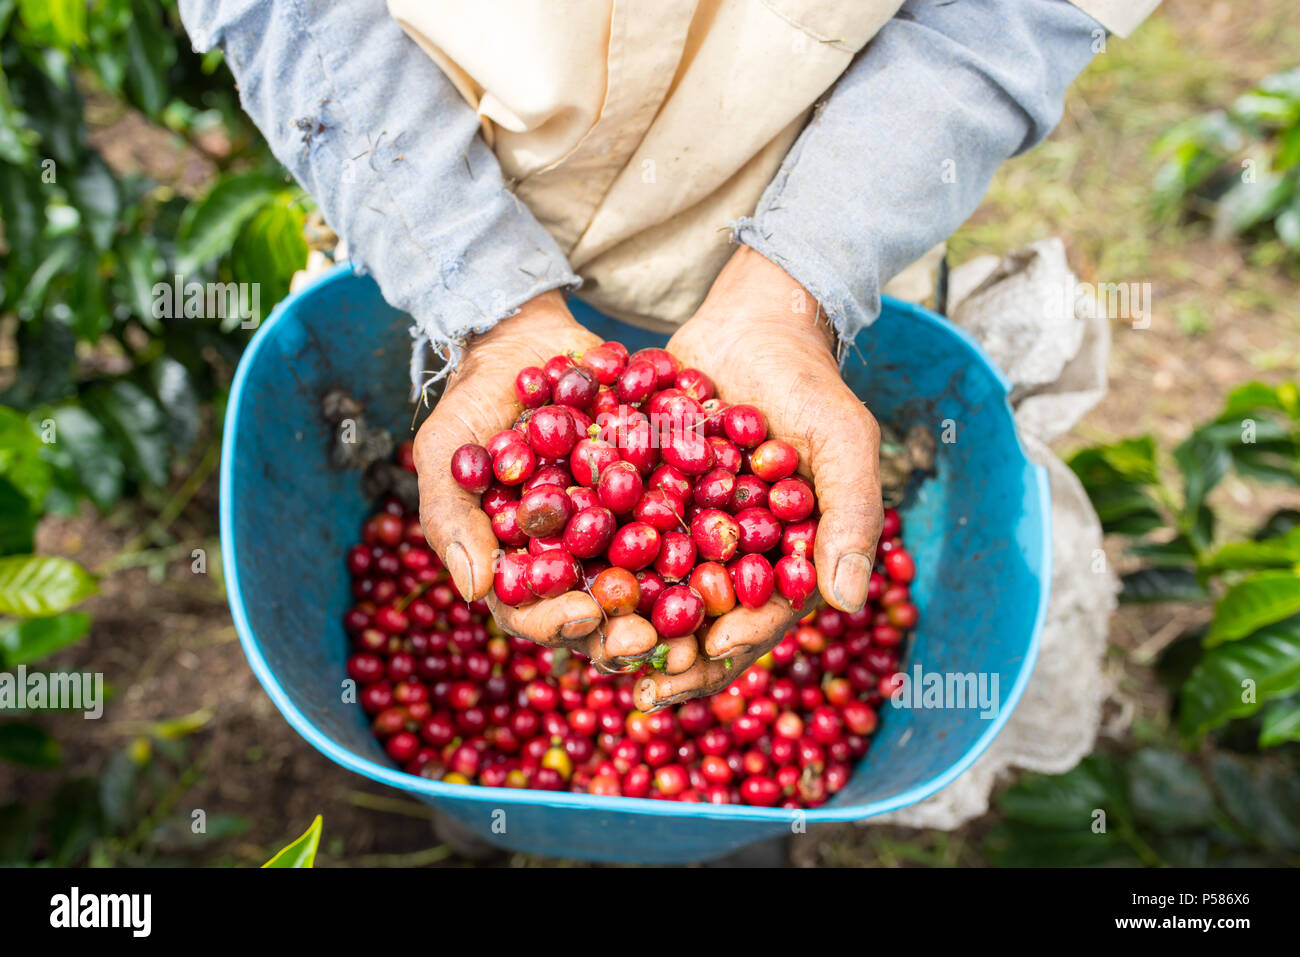 Farmer showing red and picked coffee beans in his hands Stock Photo